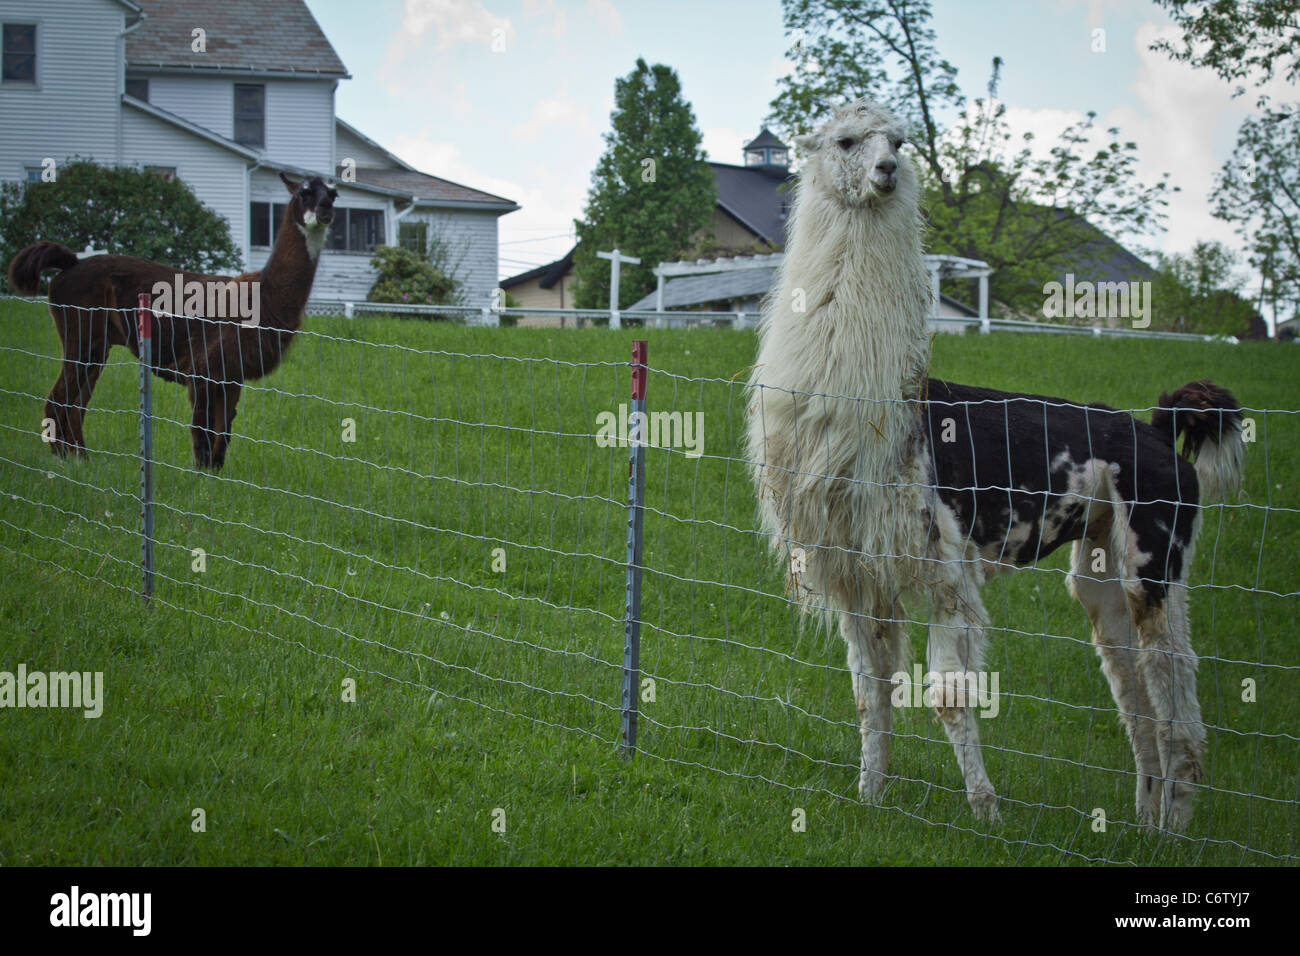 Two lamas grassing on grass field in USA Stock Photo